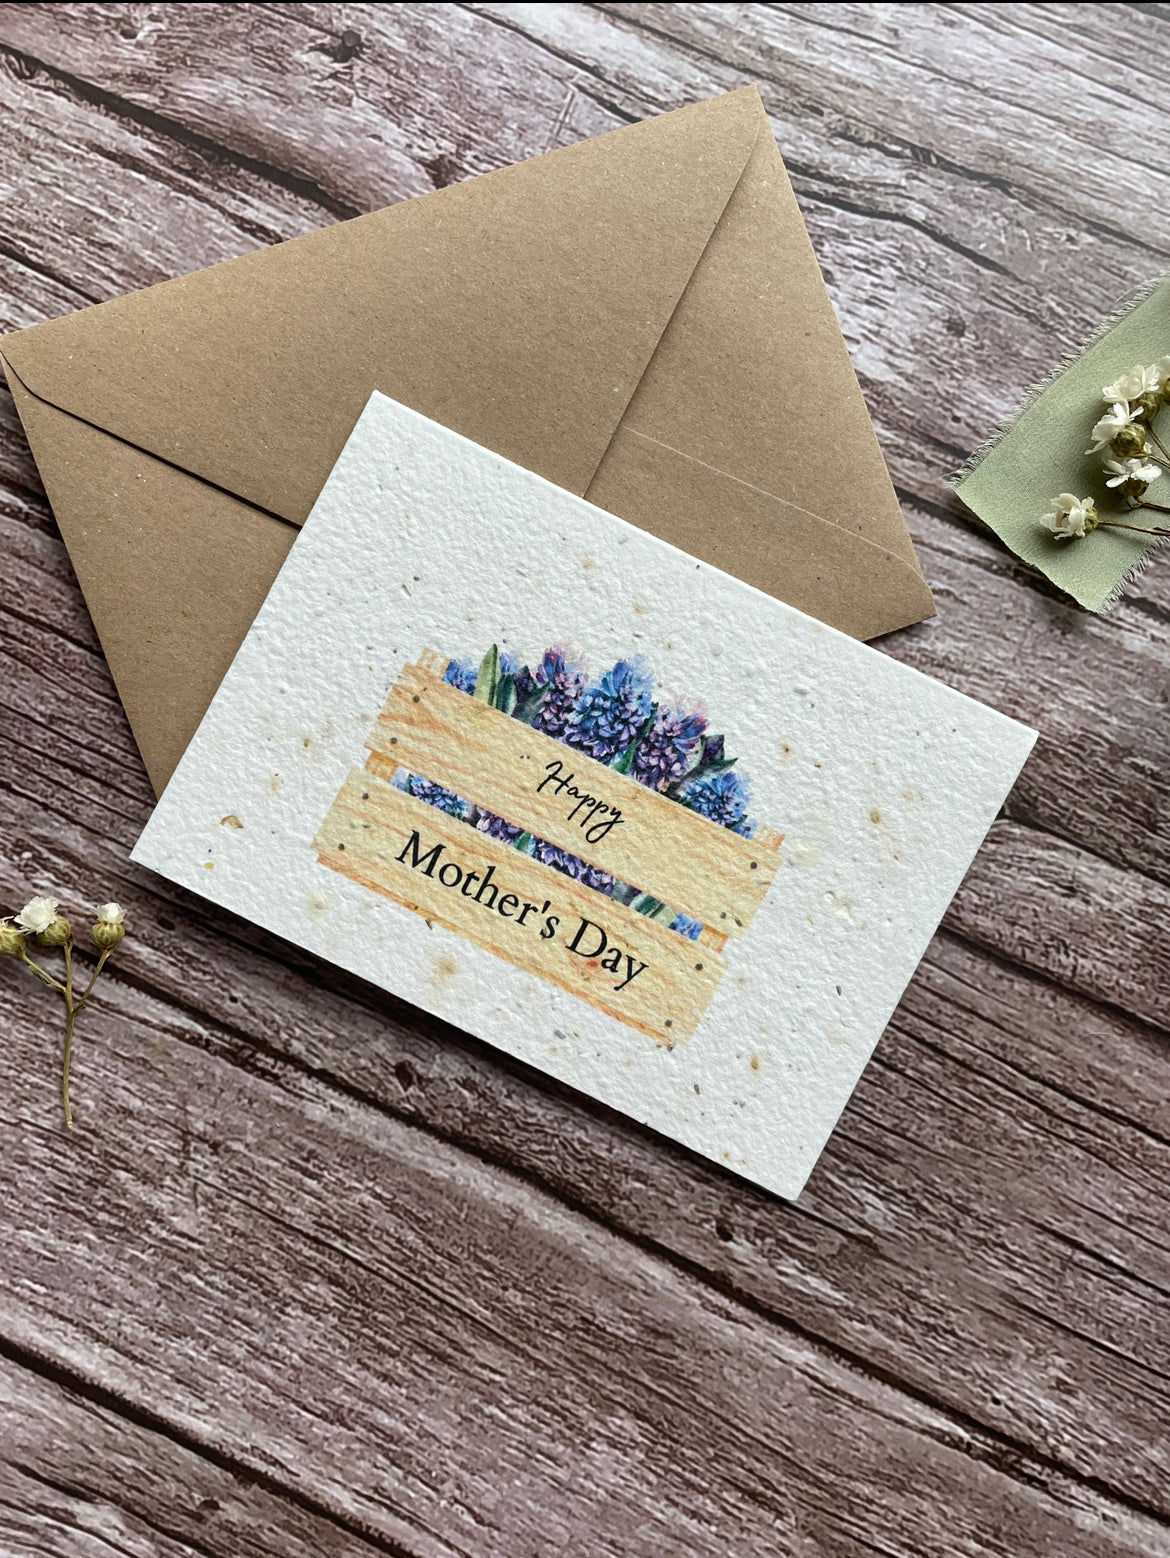 Mother's Day Seed Card - Hyacinth